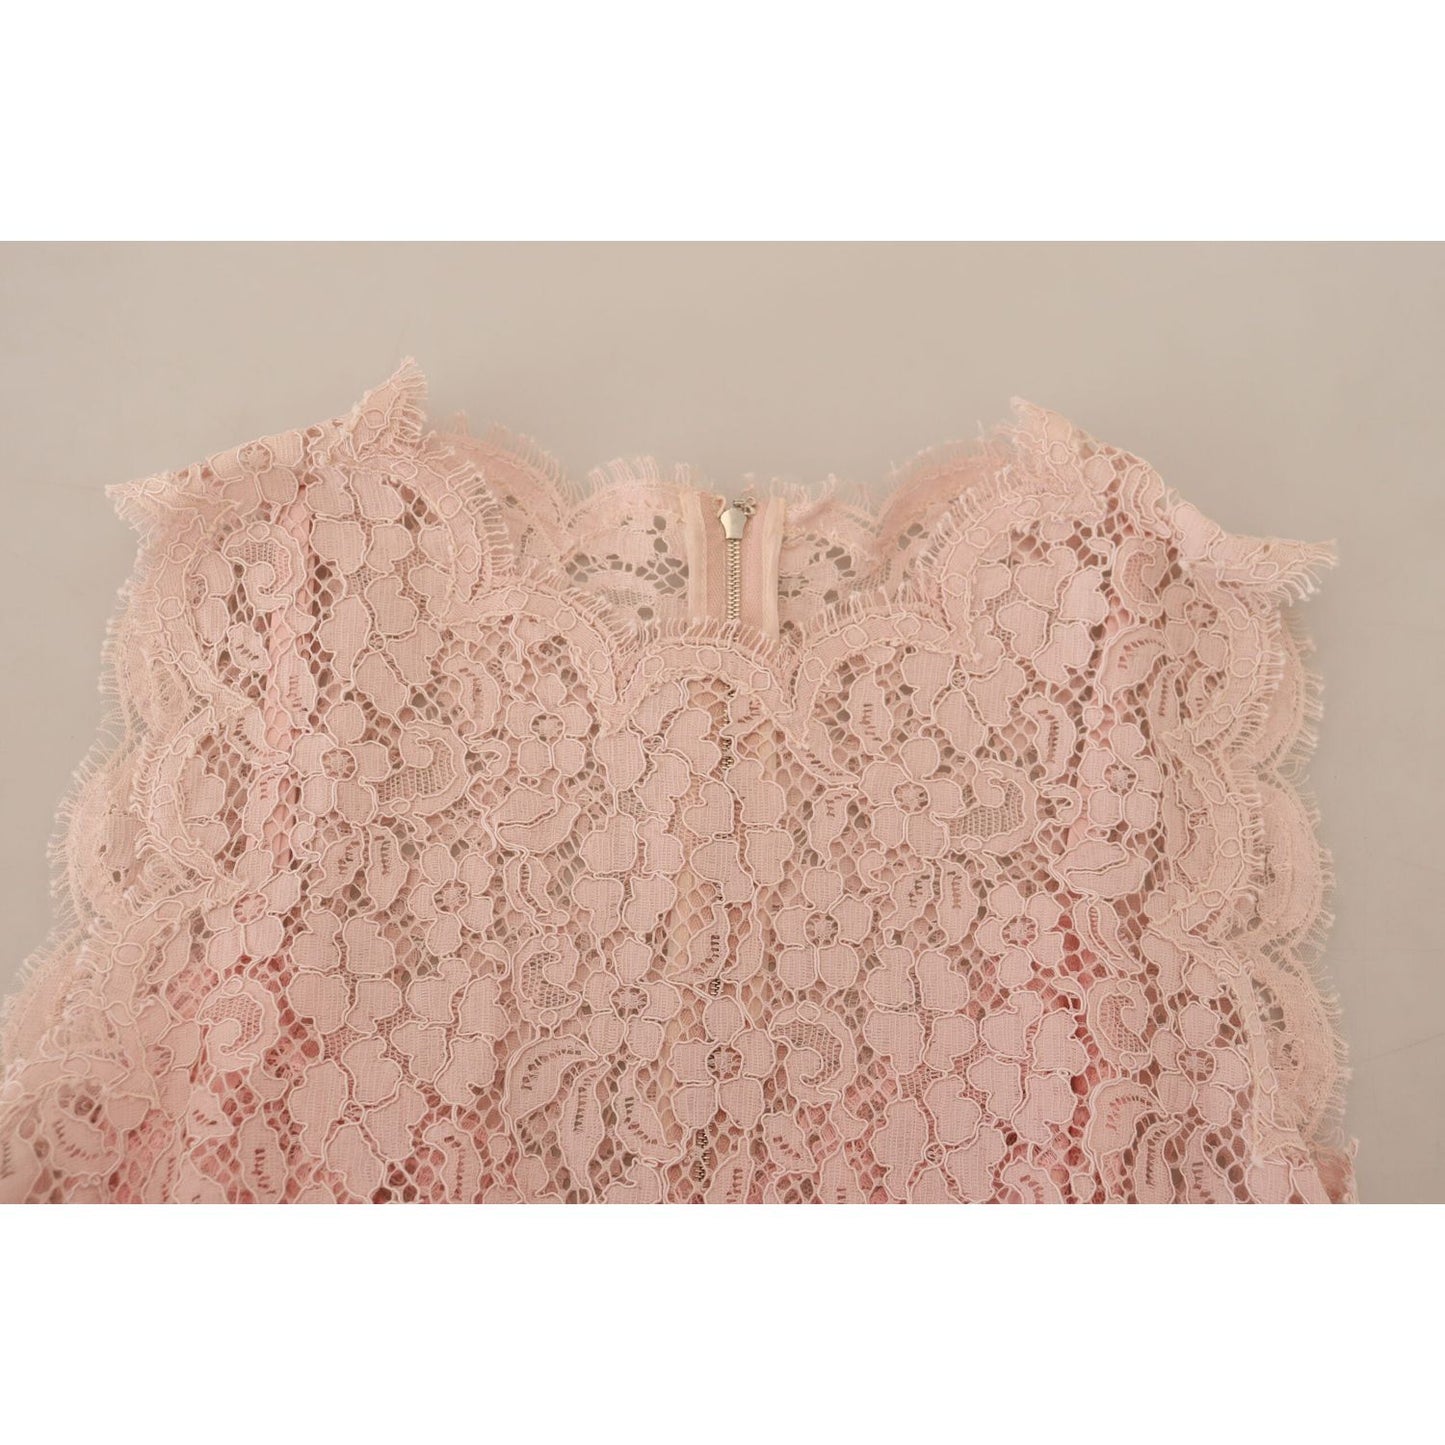 Dolce & Gabbana Elegant Sheer Lace Sleeveless Blouse in Pink pink-floral-lace-sleeveless-tank-blouse-top-1